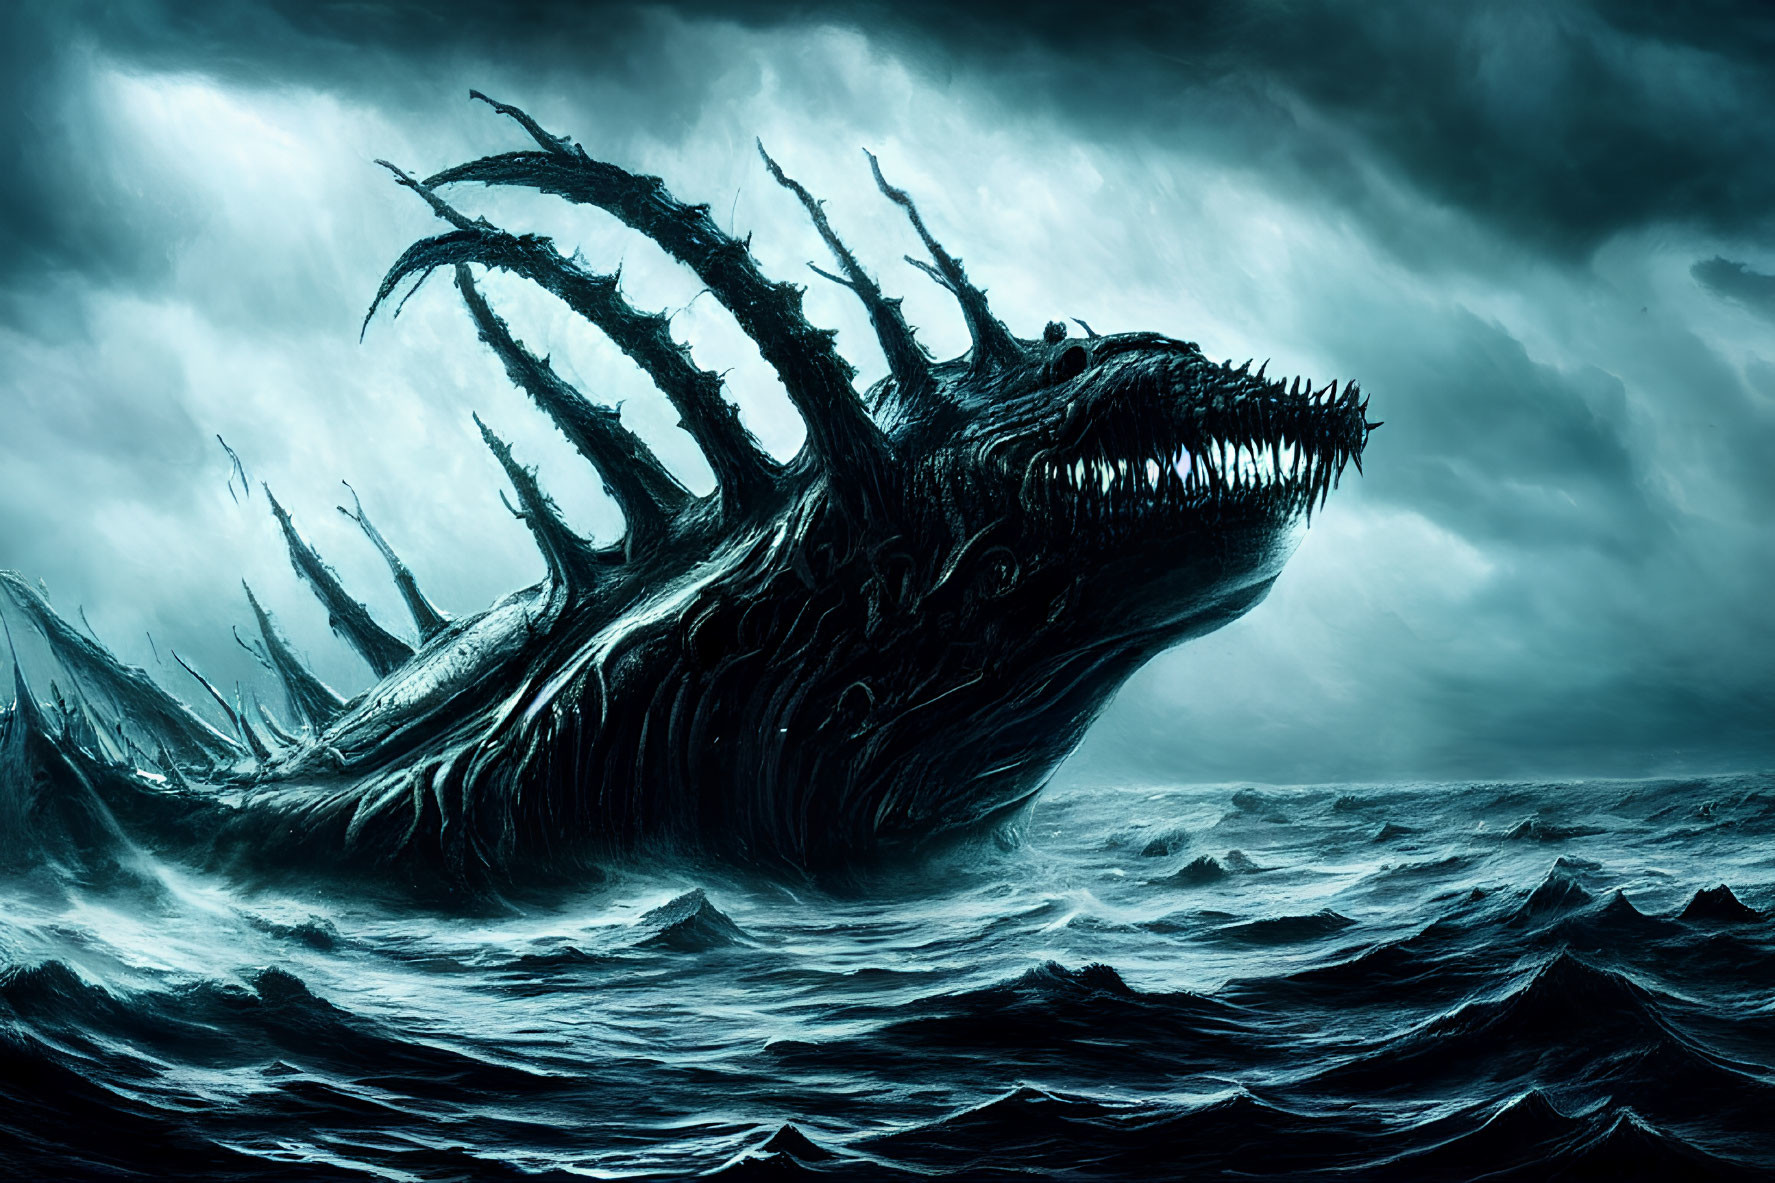 Monstrous sea creature with spikes and teeth in stormy ocean waves